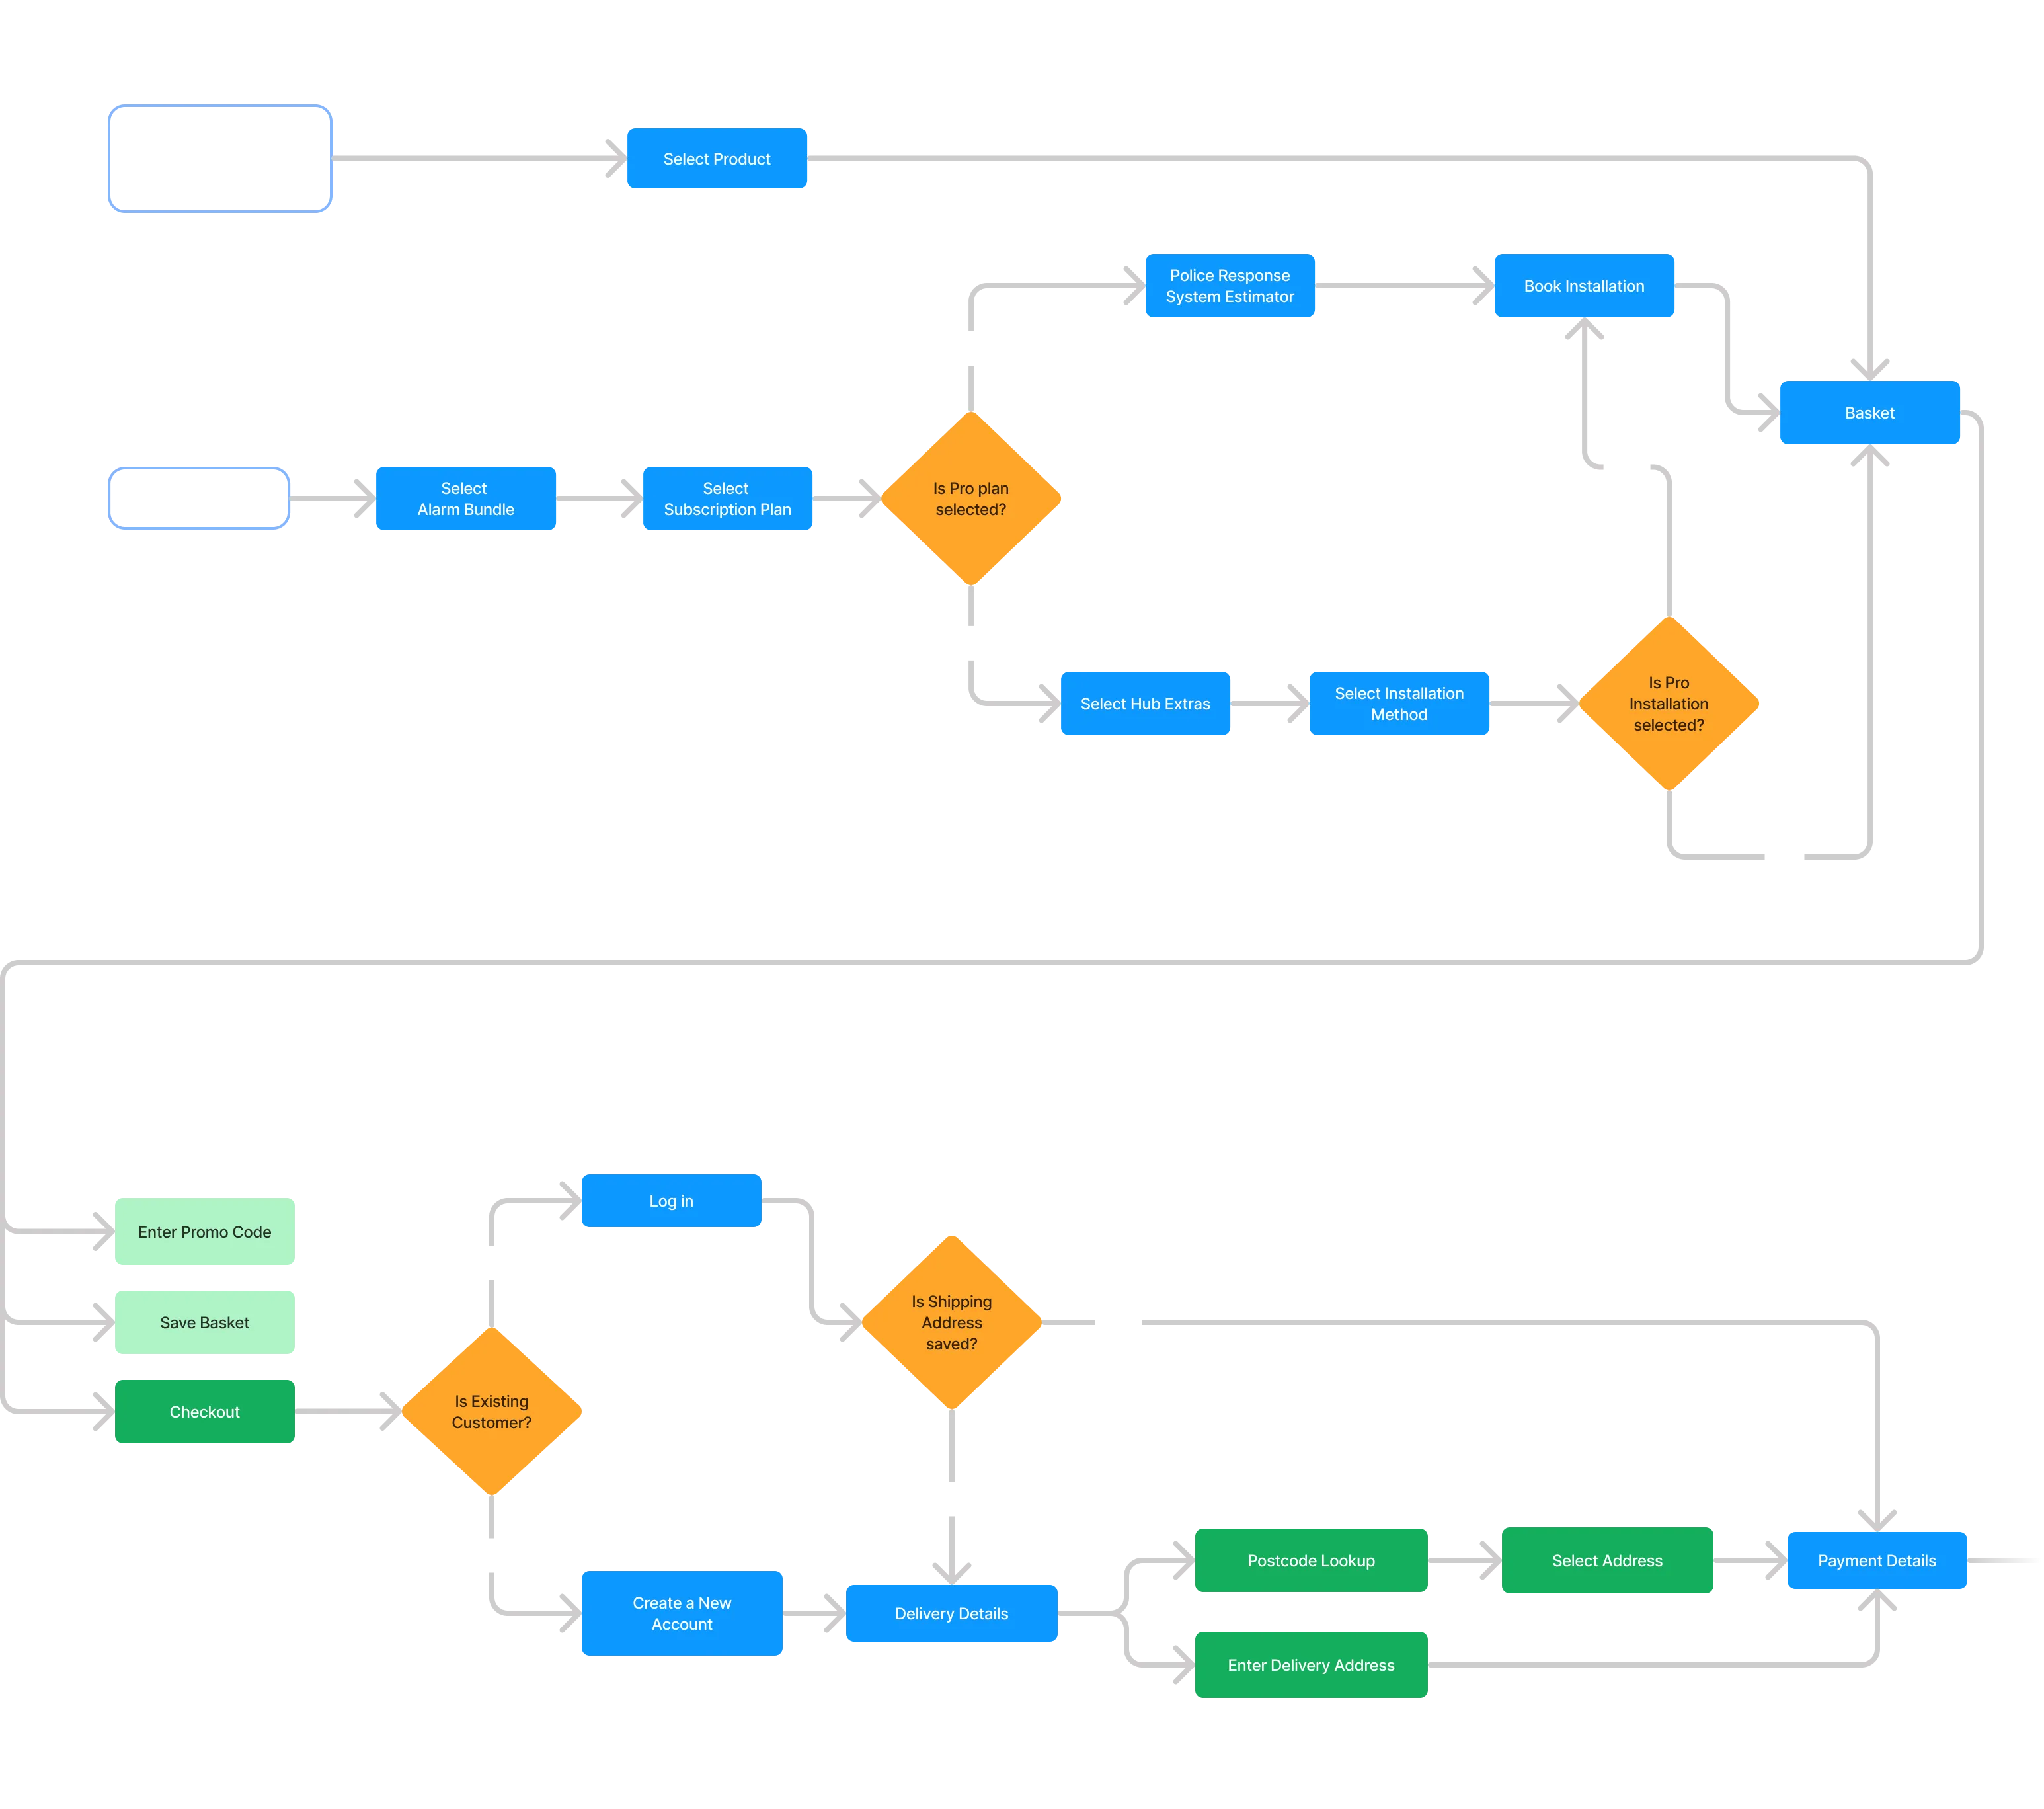 Image showing a detailed flowchart of the purchase process on an e-commerce website. It outlines the customer journey from product selection to final checkout. The flowchart starts with 'Shop Individual Products & Accessories,' leading to 'Select Product' and then branches into 'Purchase Flow' where the user can 'Select Alarm Bundle' followed by 'Select Subscription Plan.' Decision points are illustrated with yellow diamonds, asking if a Pro plan or Pro installation is selected, leading to different paths such as 'Police Response System Estimator,' 'Select Hub Extras,' or 'Book Installation.' The flow continues with options for existing customers to log in or new customers to create an account, enter promo codes, save the basket, and provide delivery details through 'Postcode Lookup' or 'Enter Delivery Address' before proceeding to 'Payment Details.' The diagram uses a combination of blue rectangles for actions, green rounded rectangles for the next steps, and connecting arrows, all on a dark background.